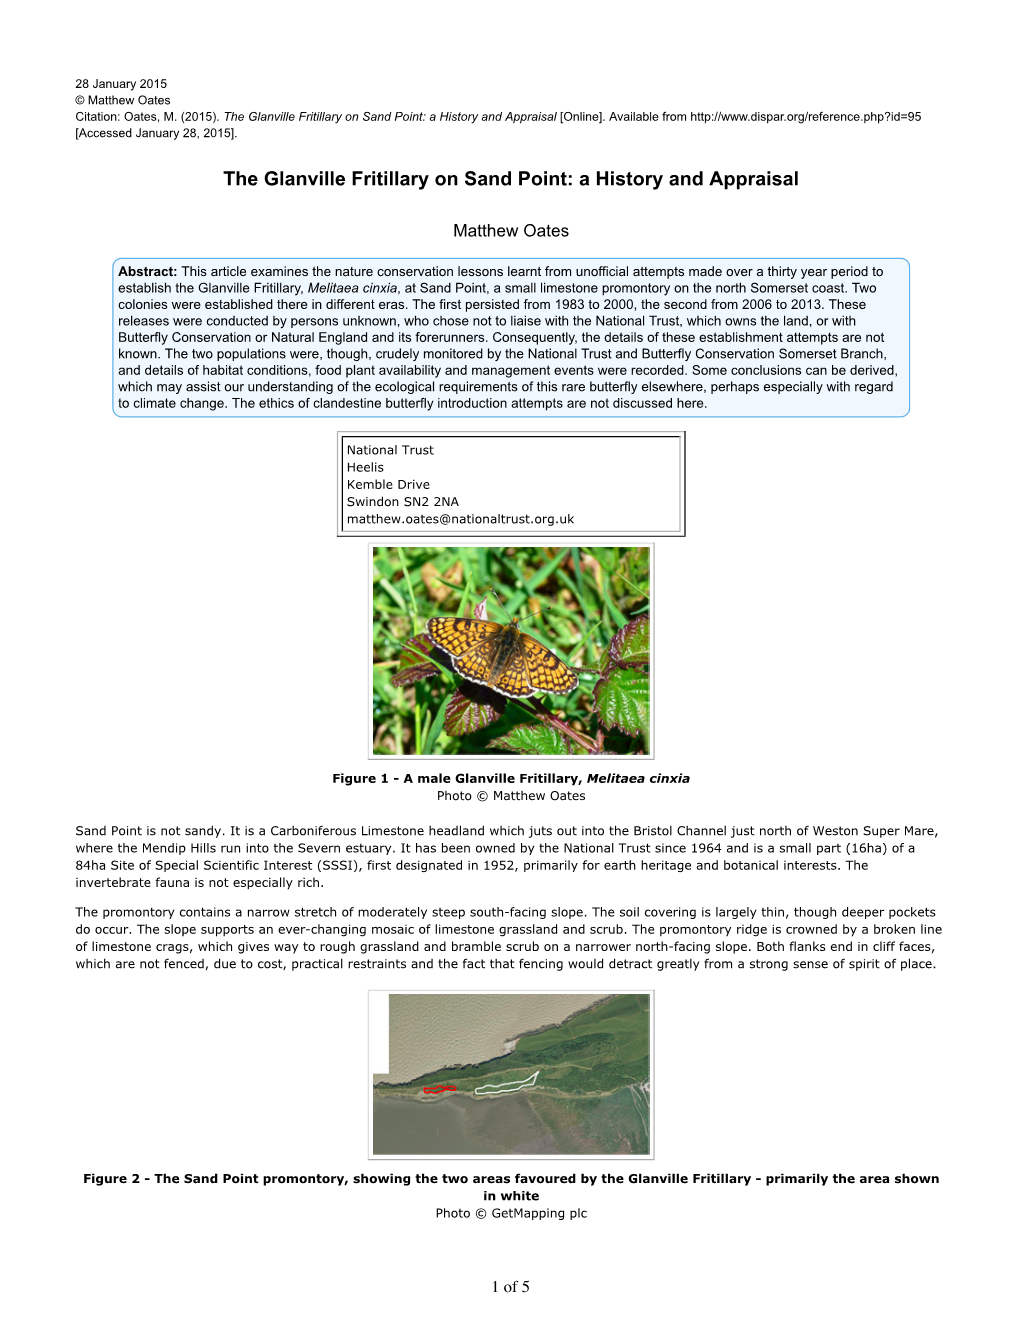 The Glanville Fritillary on Sand Point: a History and Appraisal [Online]